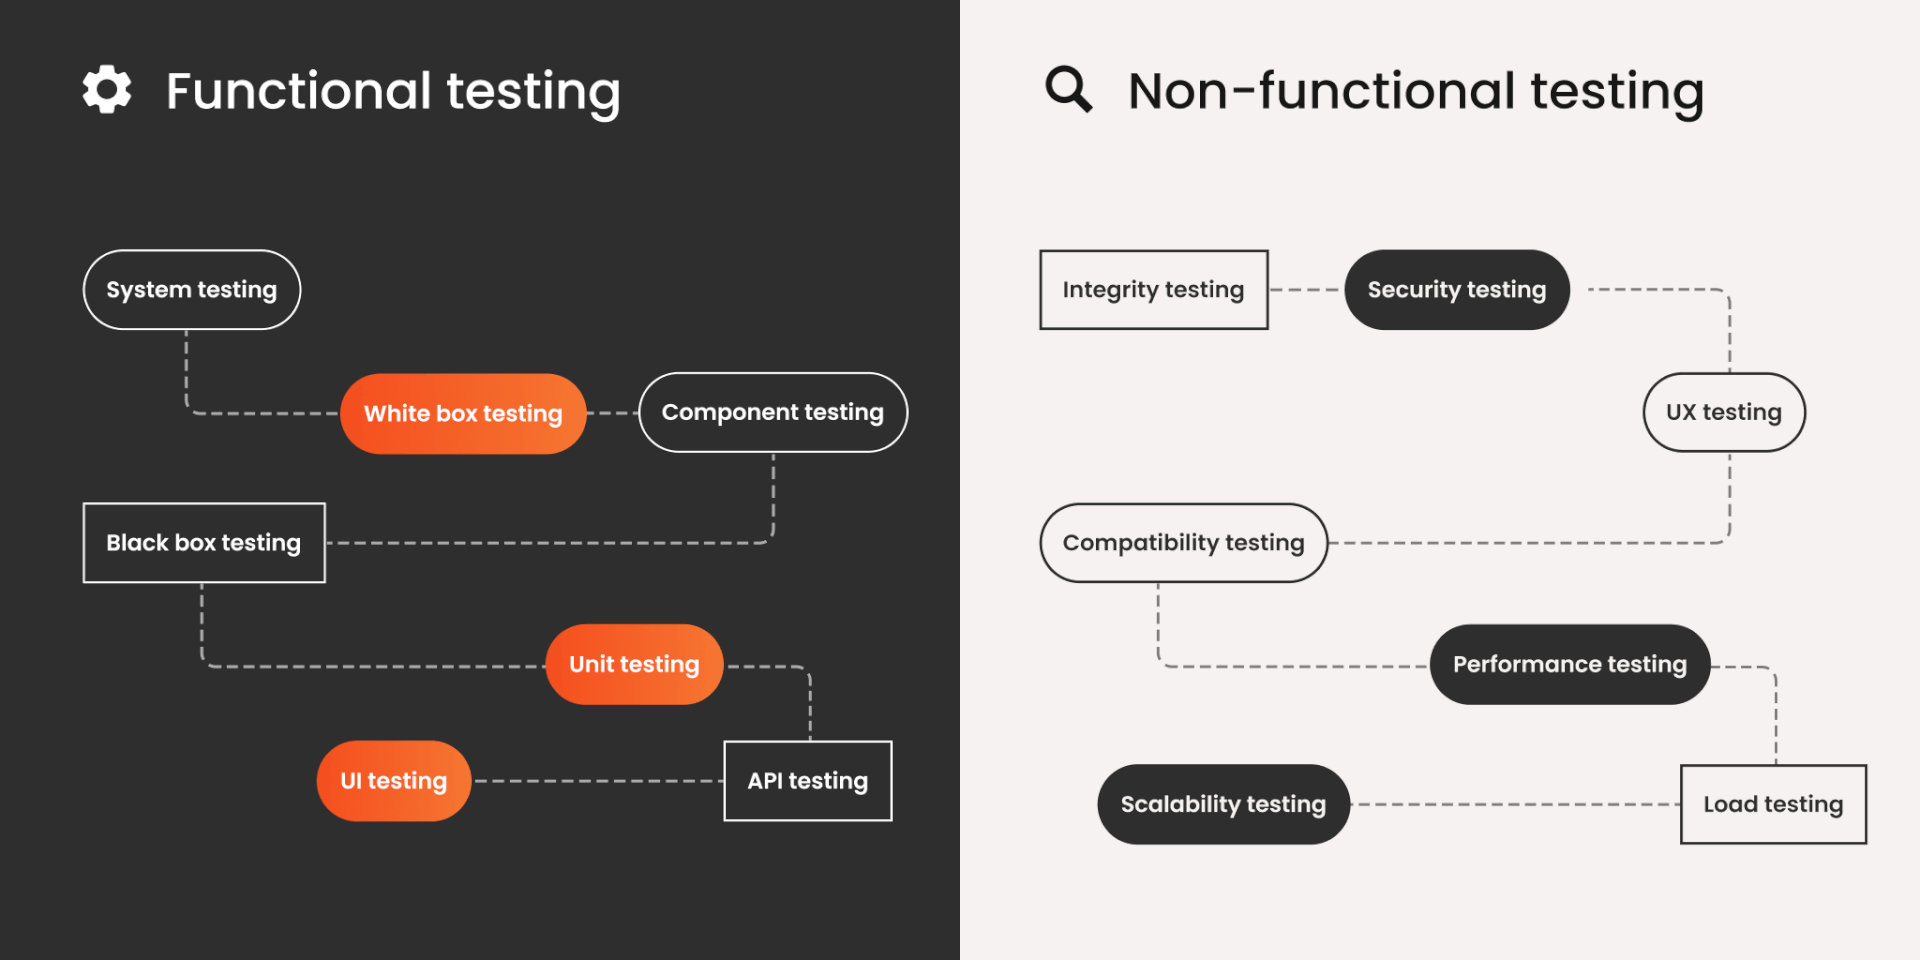 Types of functional and non-functional testing